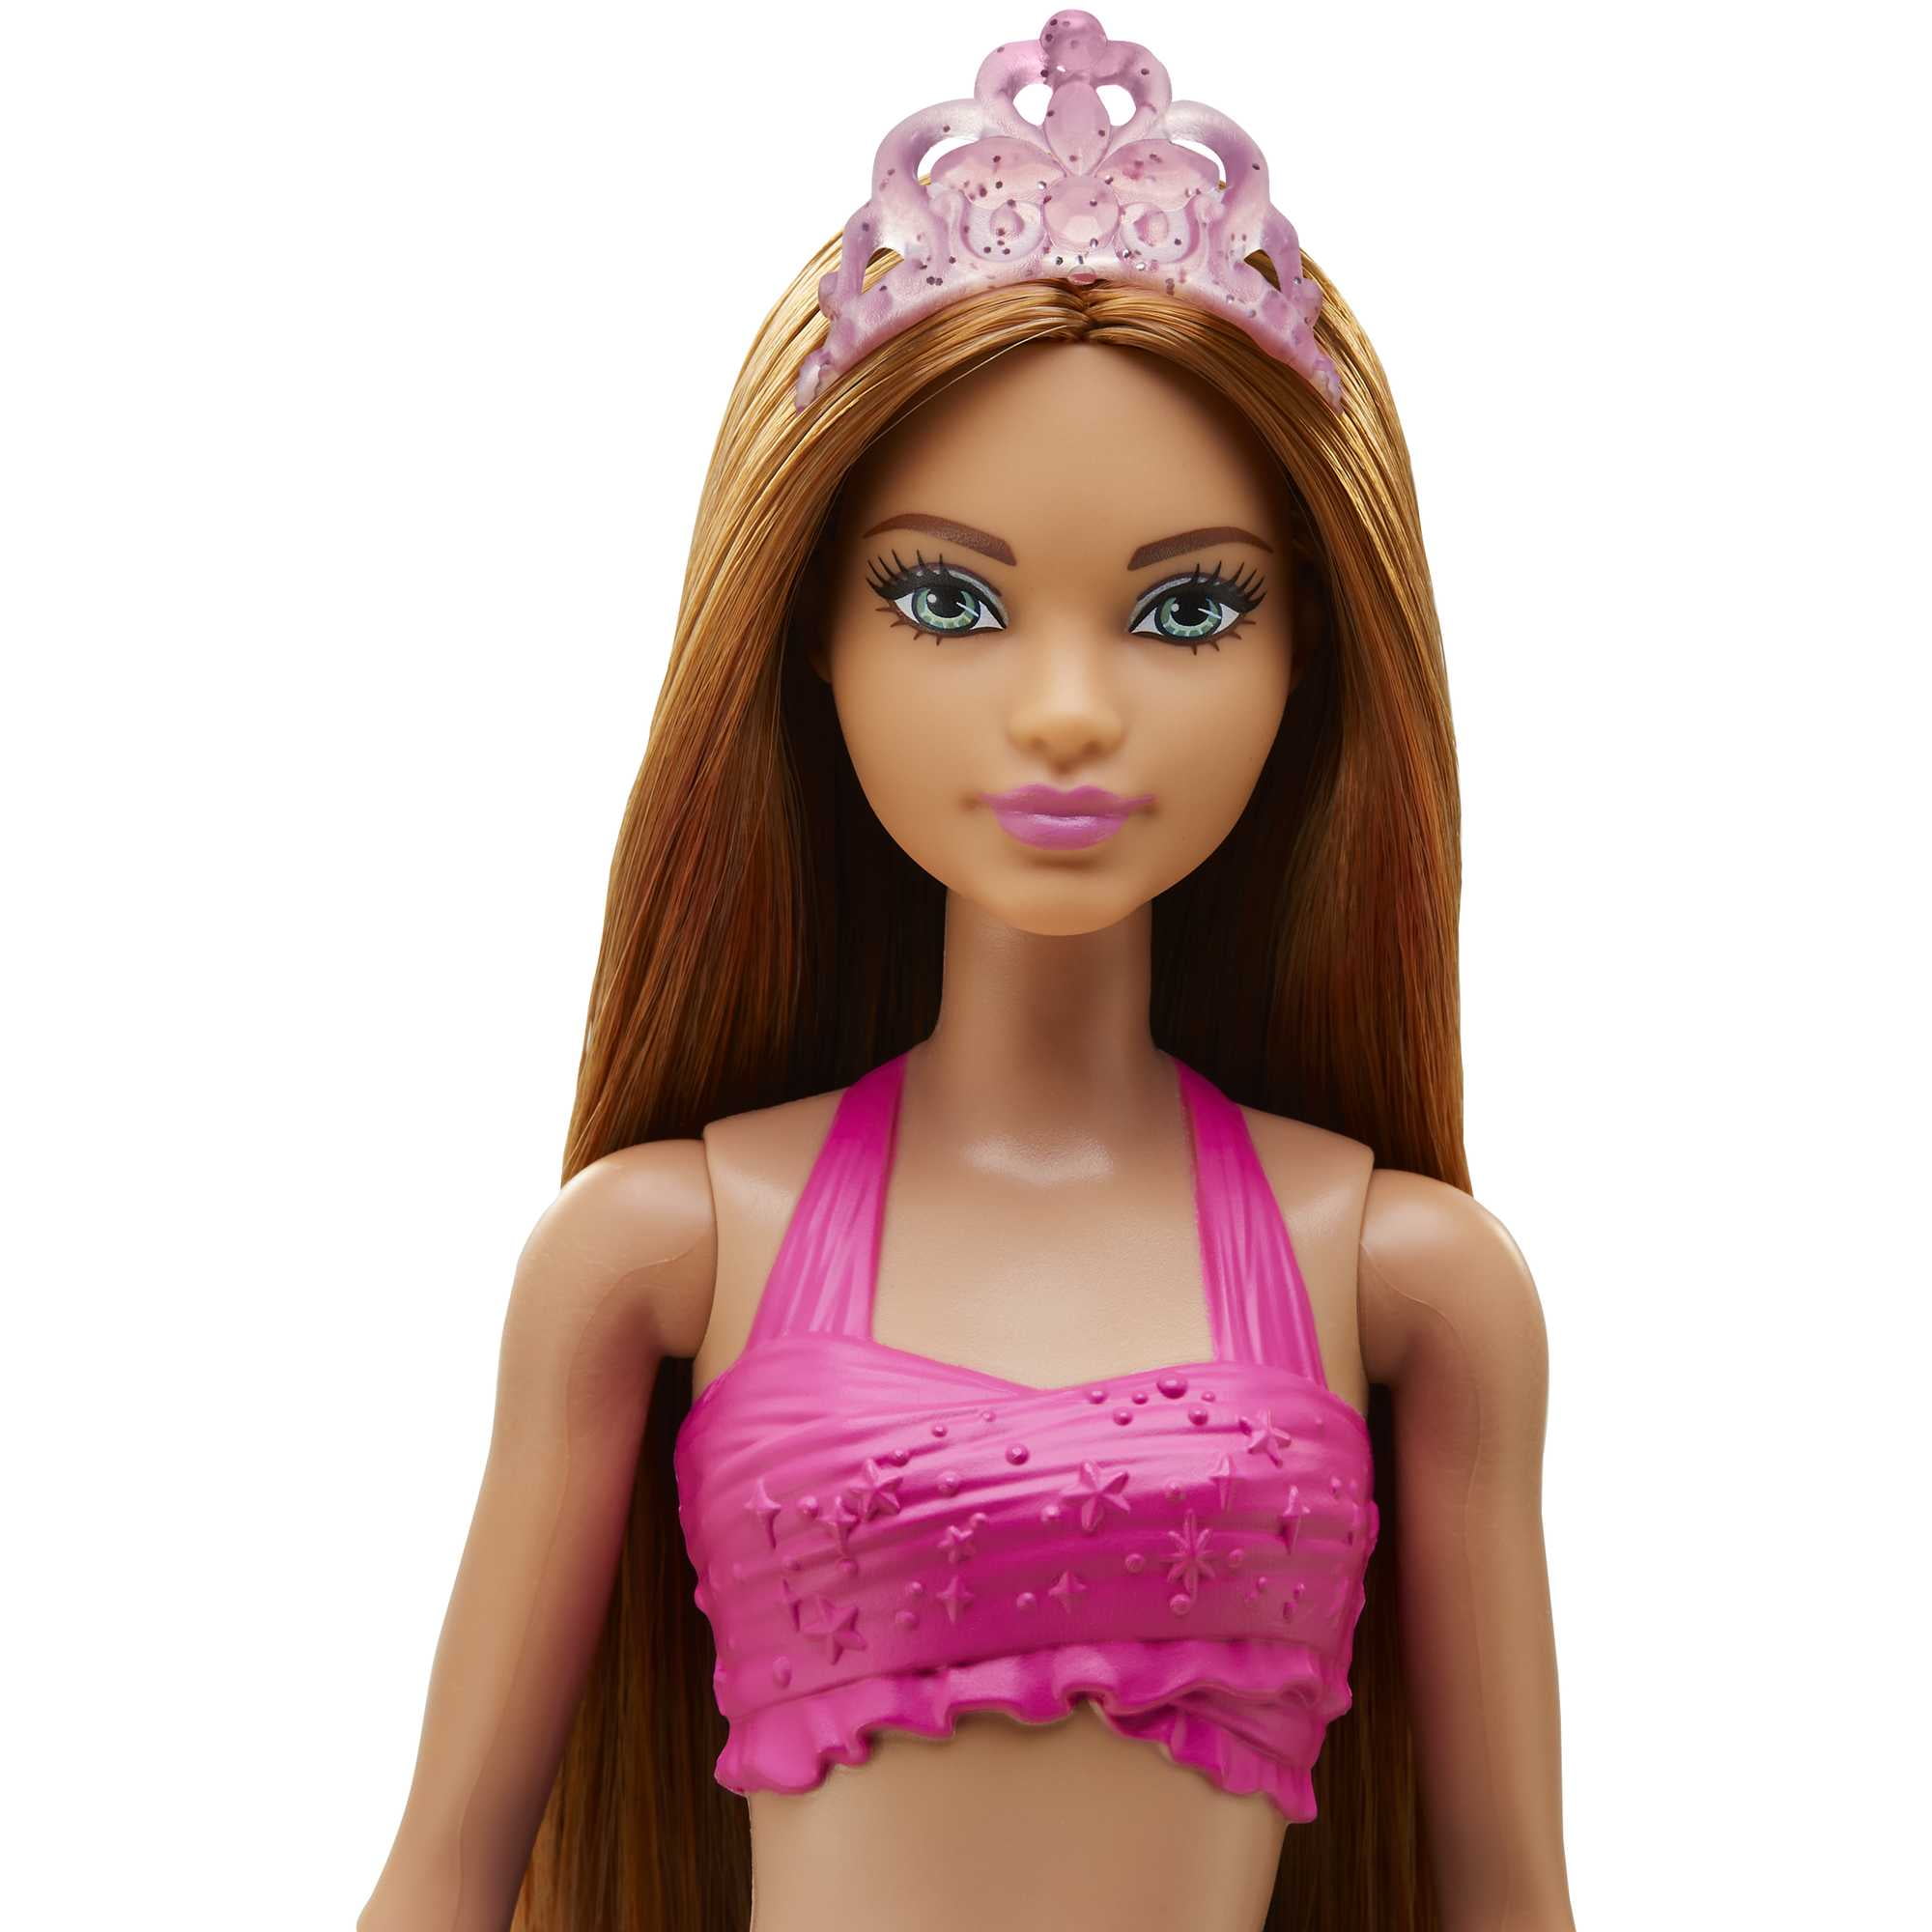 Barbie Dreamtopia Fantasy Doll, 2-in-1 Royal to Mermaid Transformation with  Accessories